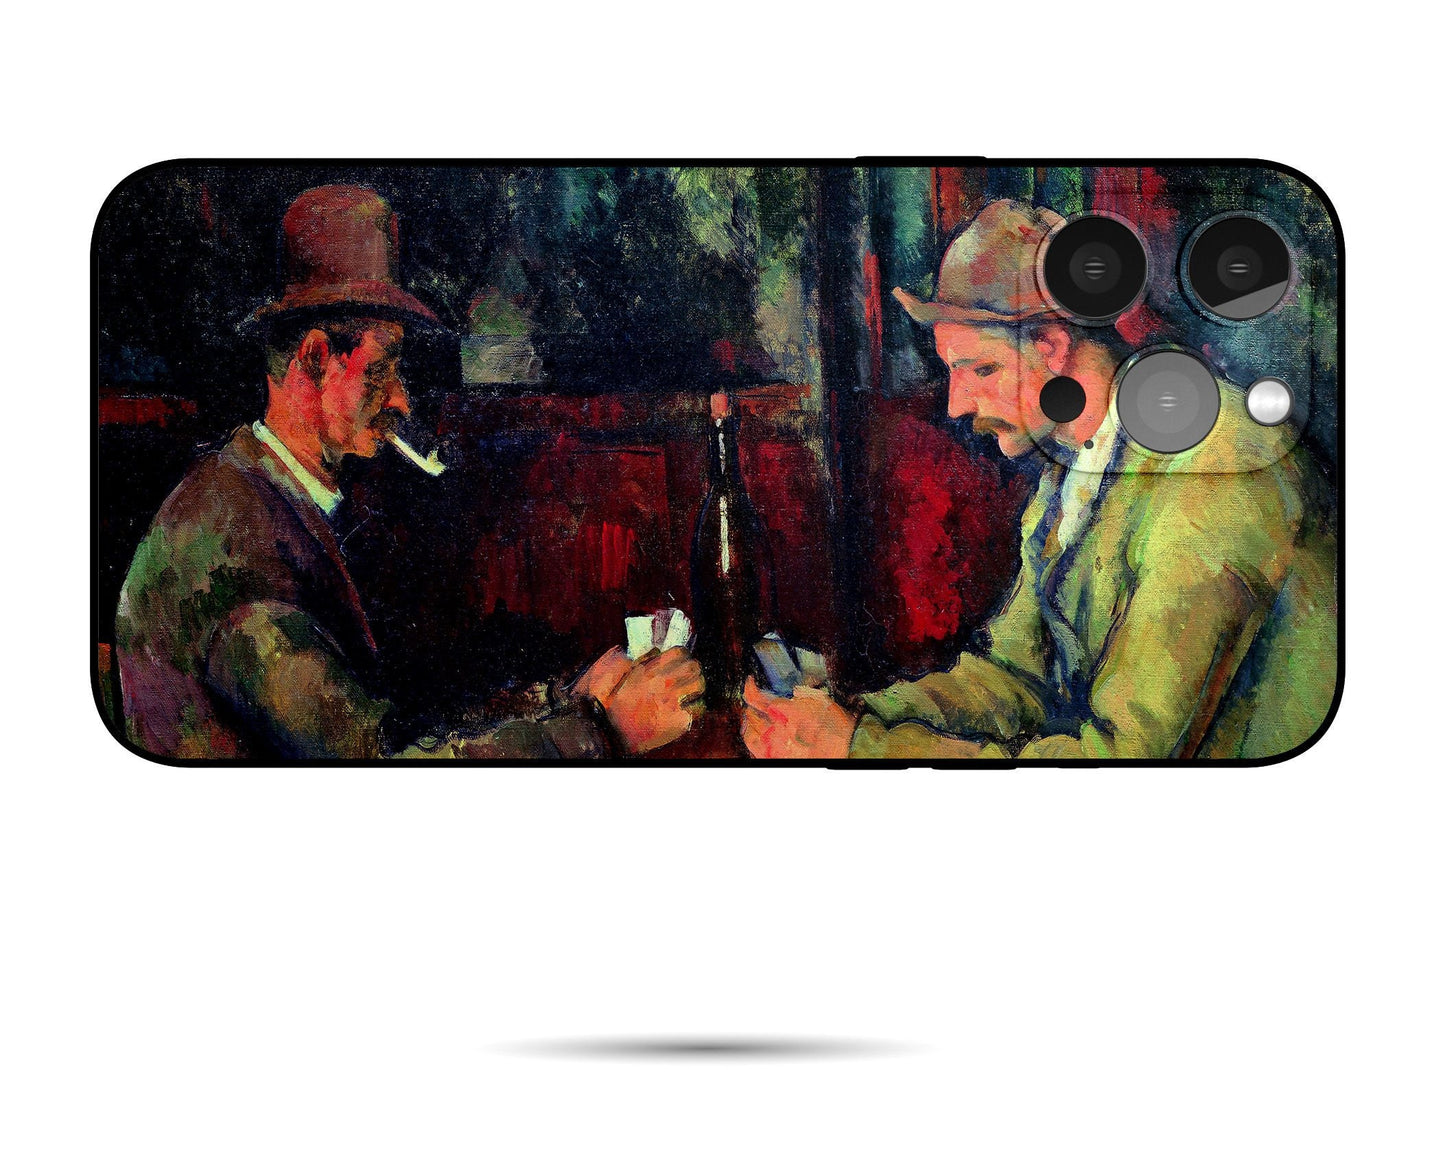 Iphone Case Of Paul Cézanne Famous Painting Iphone 14 Case, Iphone 11 Pro Case, Designer Iphone 8 Plus Case, Gift For Her, Iphone Case Matte